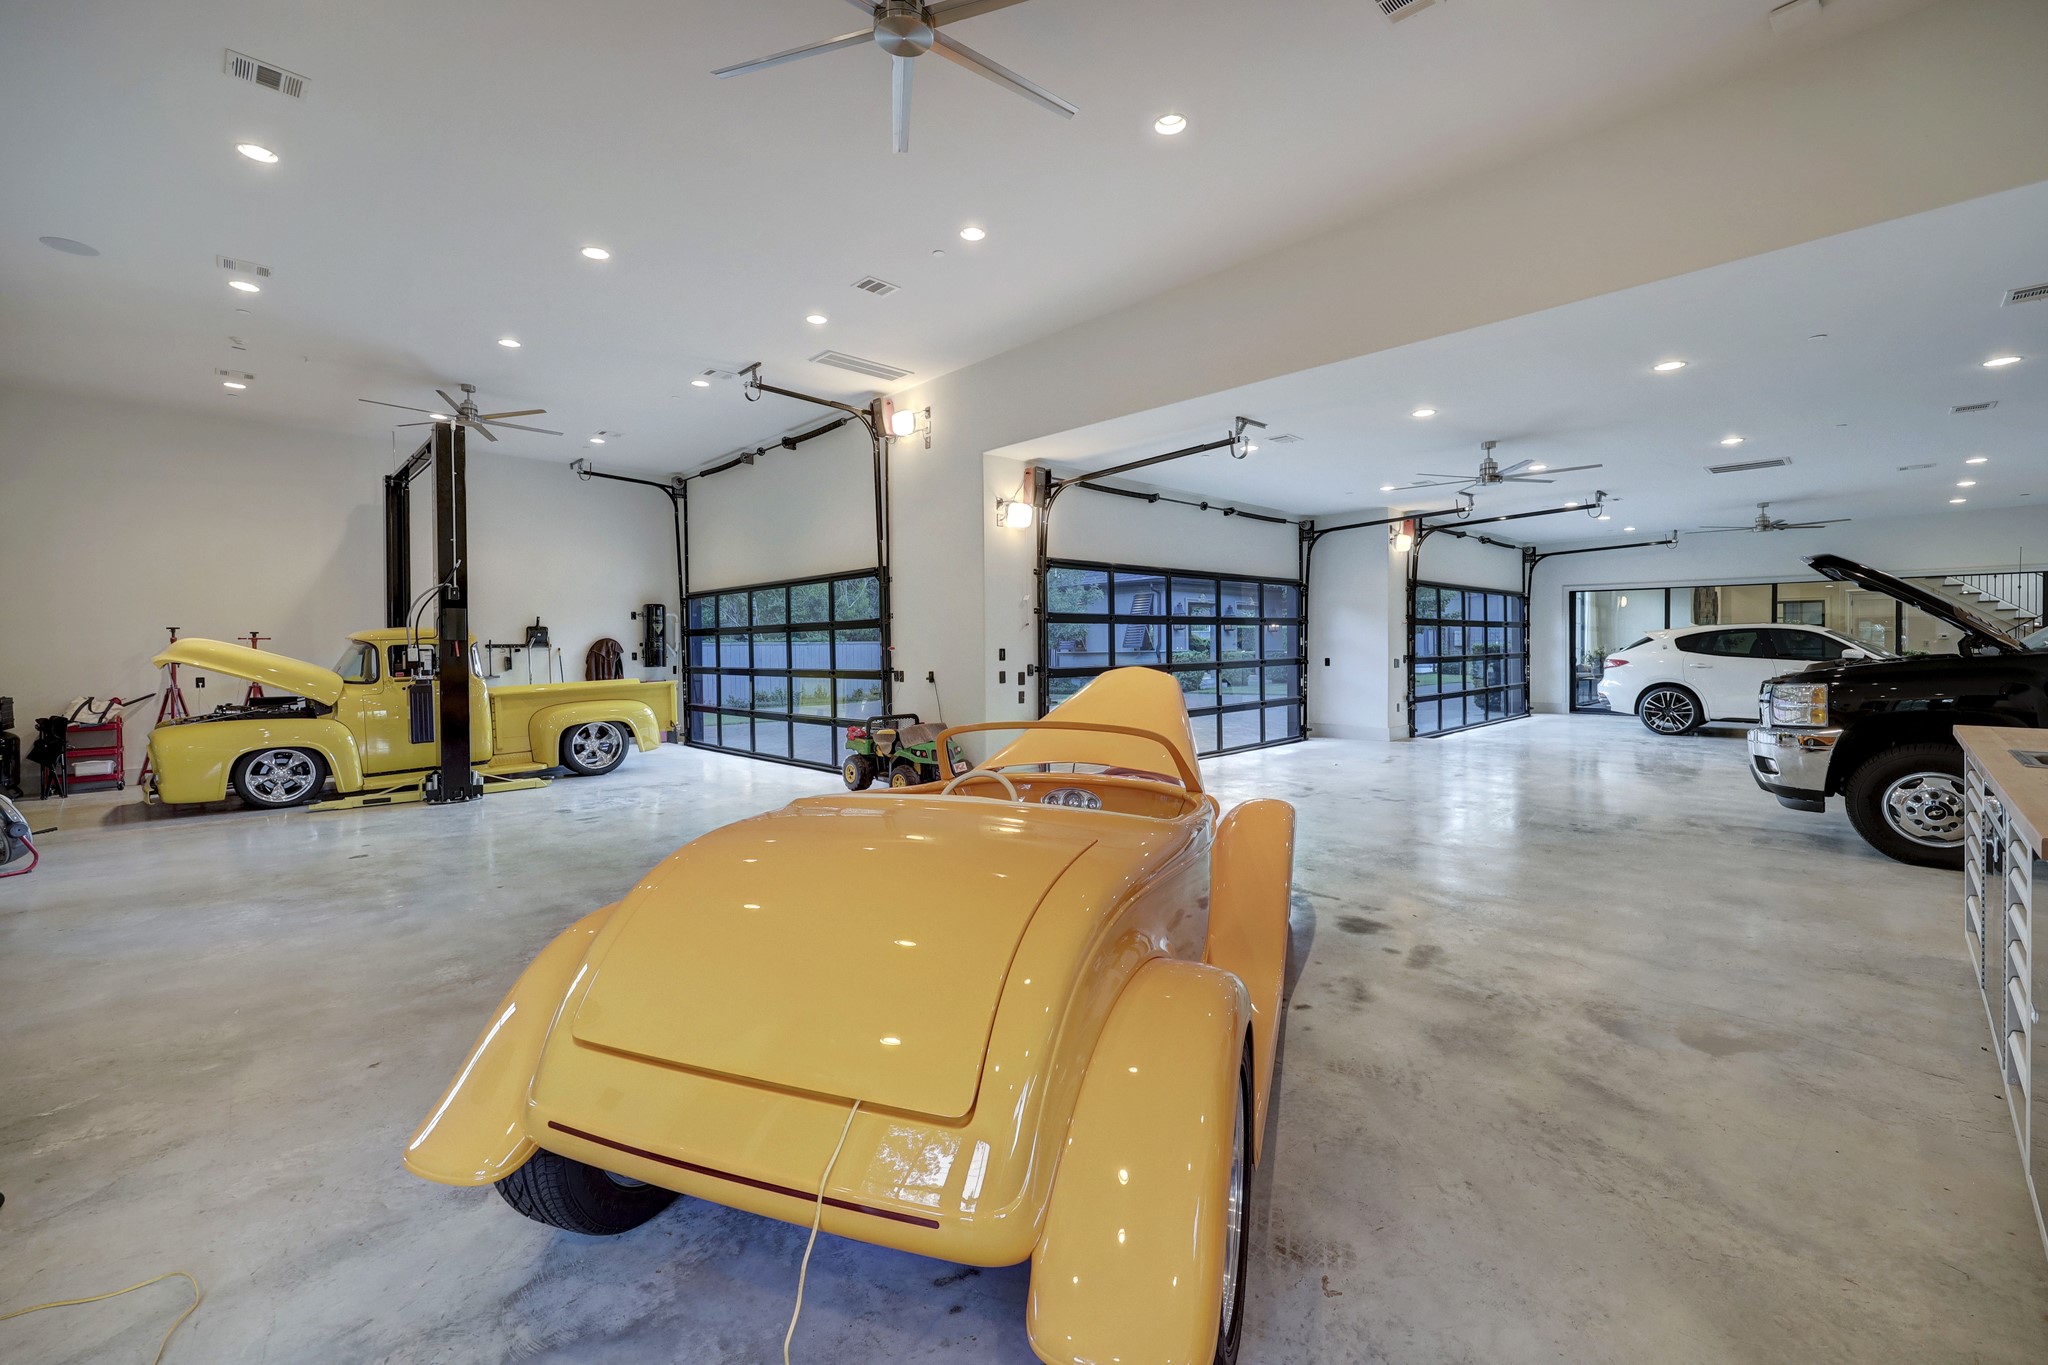 Another angle of the substantial 10 car garage. Lots of room to fit more cars for even the most avid of a car collector.